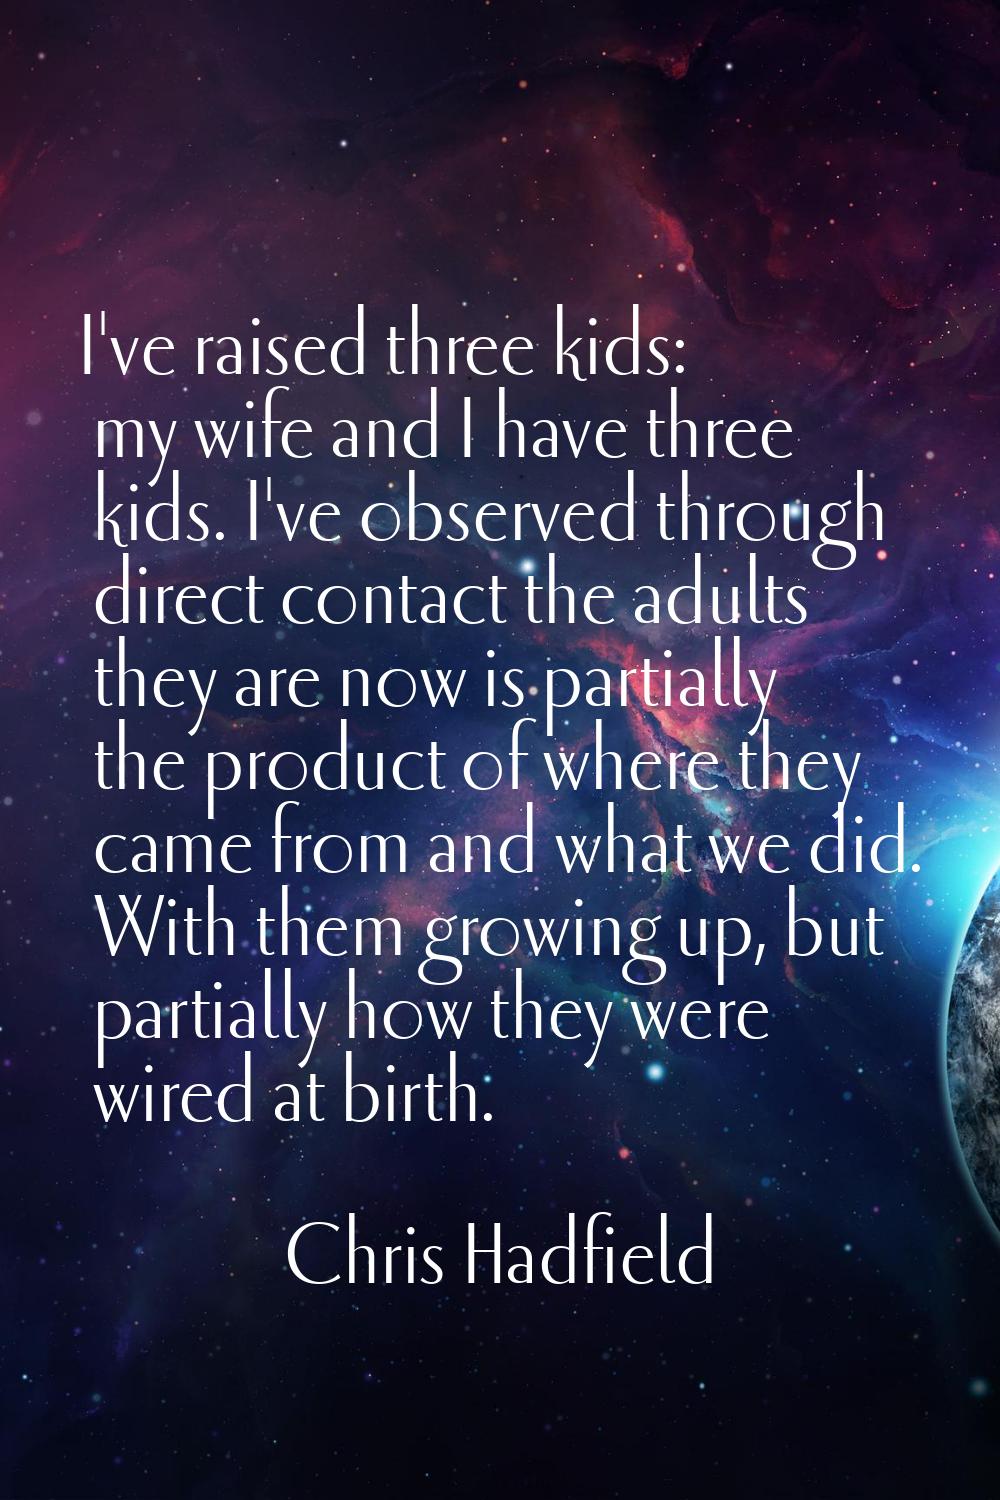 I've raised three kids: my wife and I have three kids. I've observed through direct contact the adu